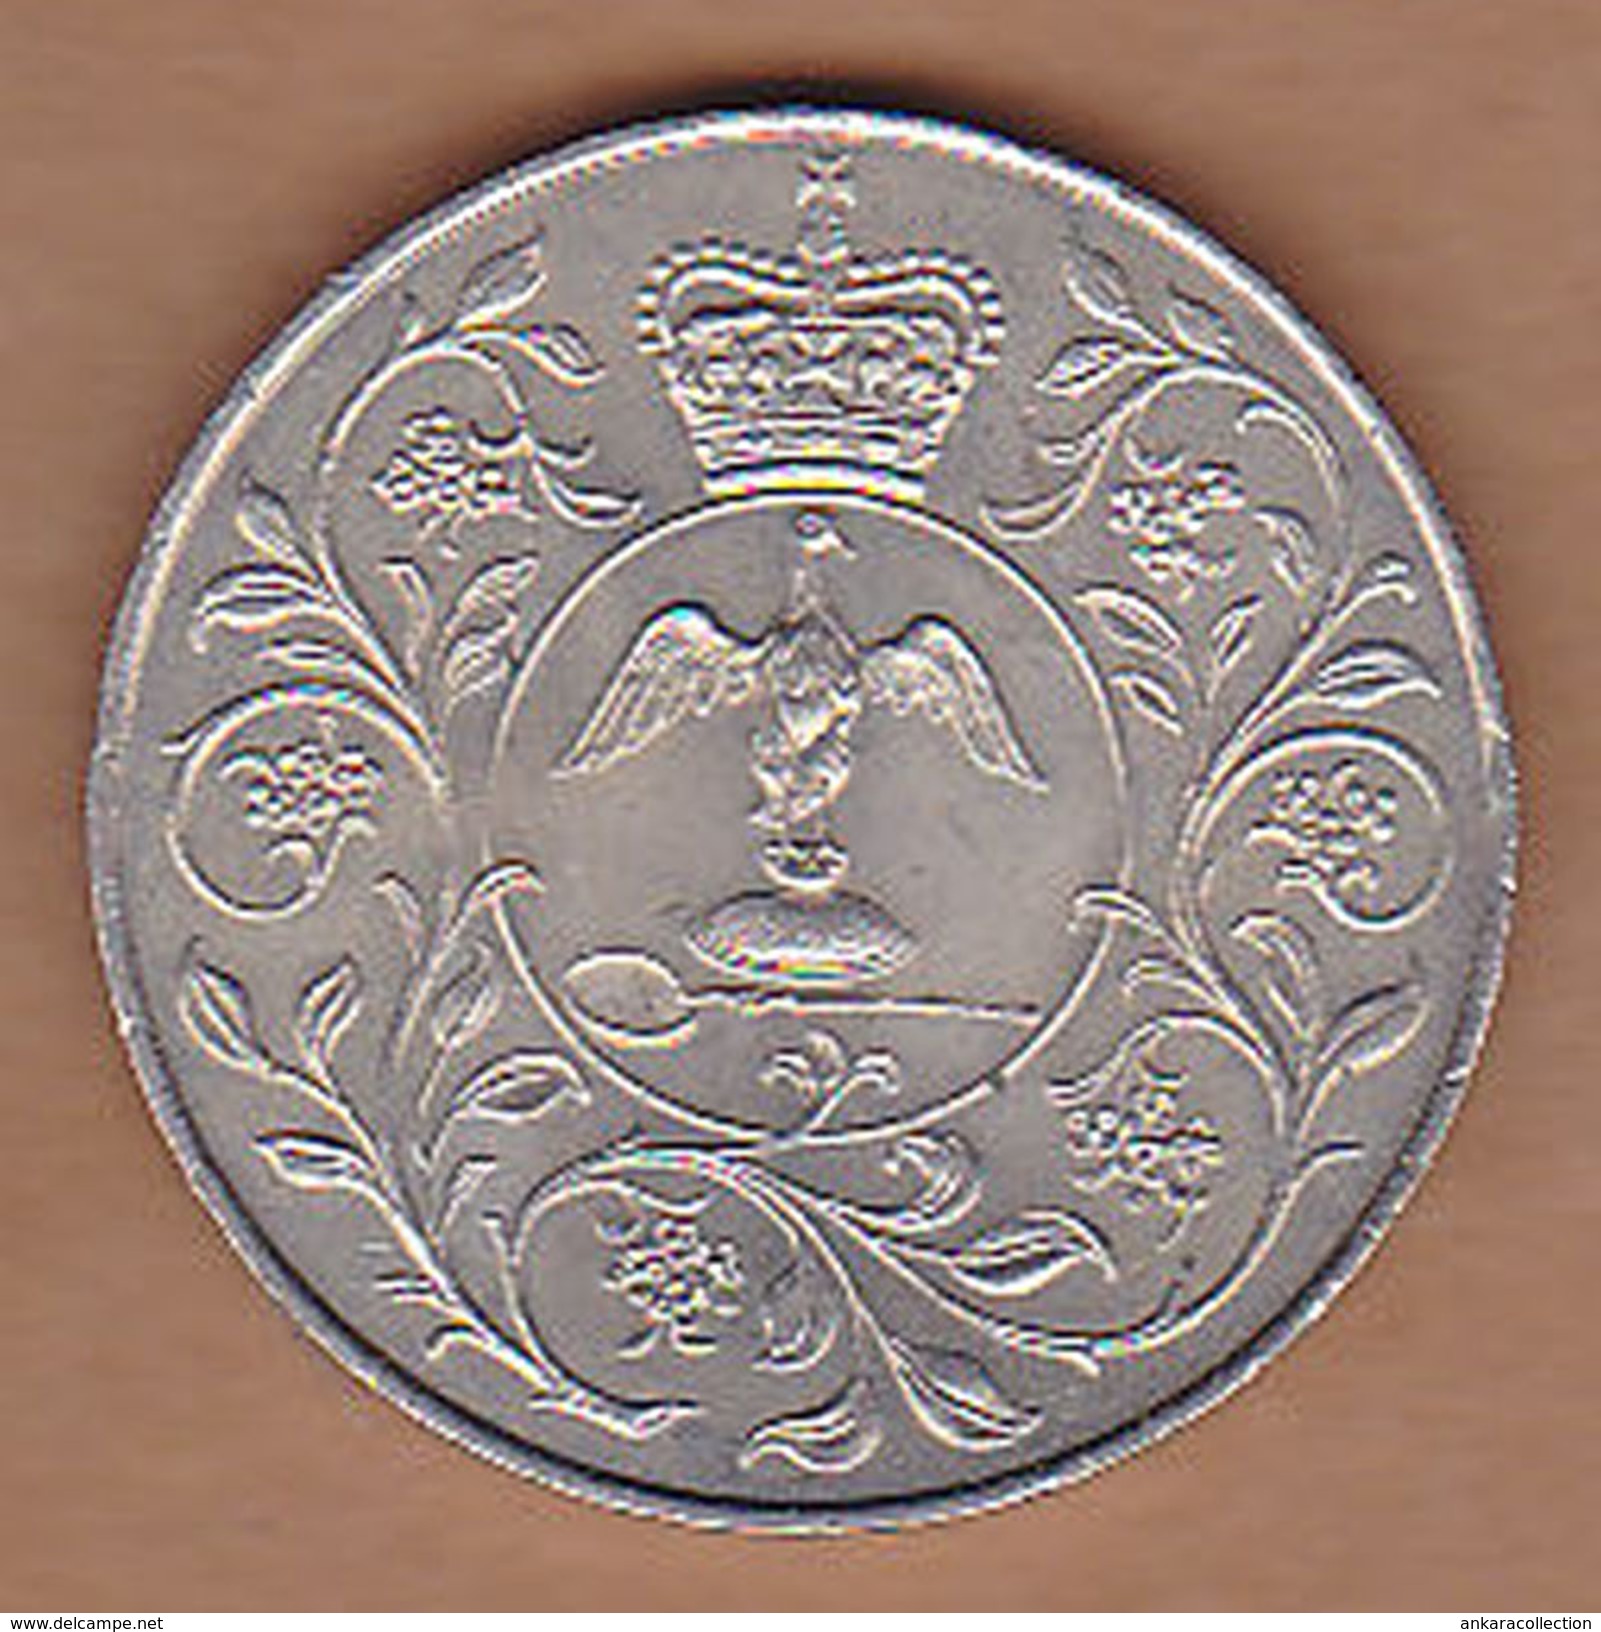 AC - QUEEN ELIZABETH II DG REG FD 1977 BRITISH SILVER CROWN TO COMMEMORATE THE QUEENS SILVER JUBILEE 1952 - 1977 - Royal/Of Nobility